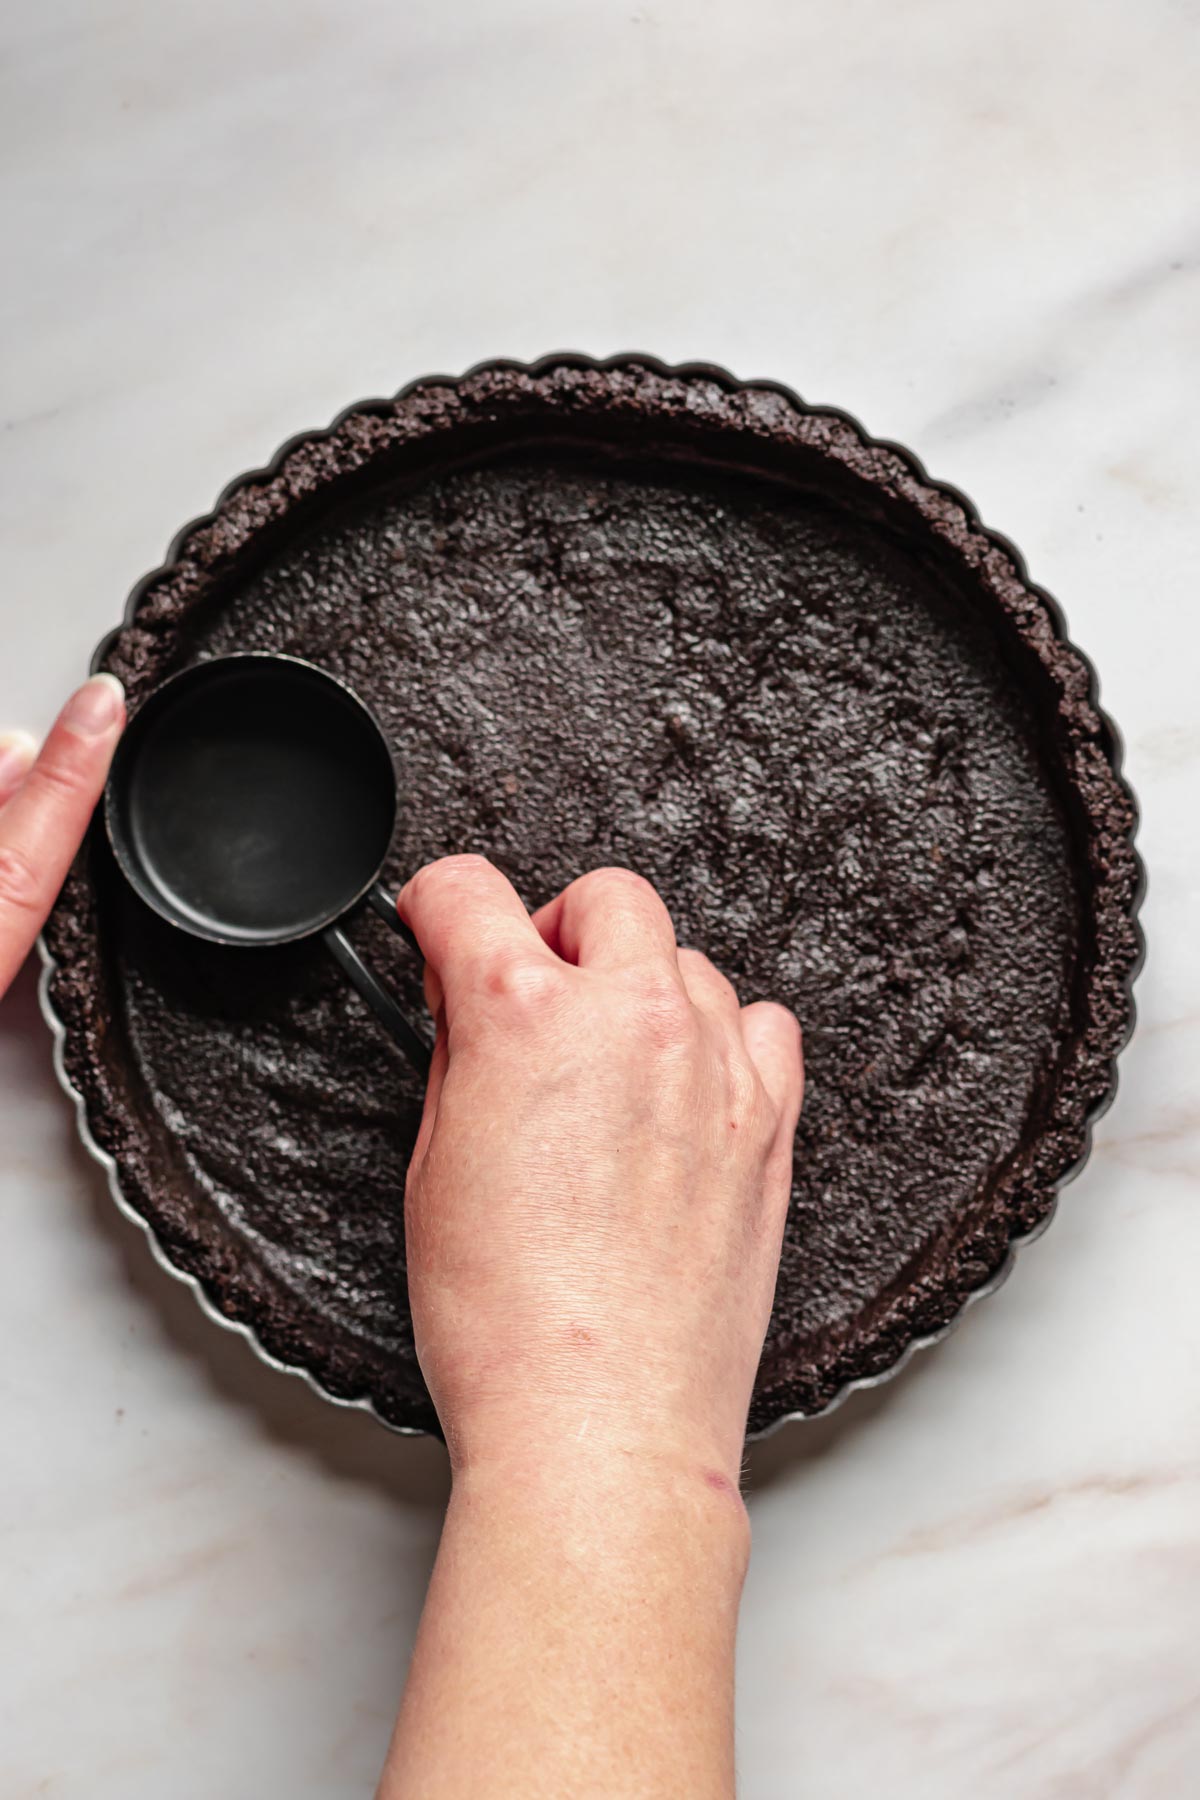 A hand forms the graham cracker crust in the tart pan.